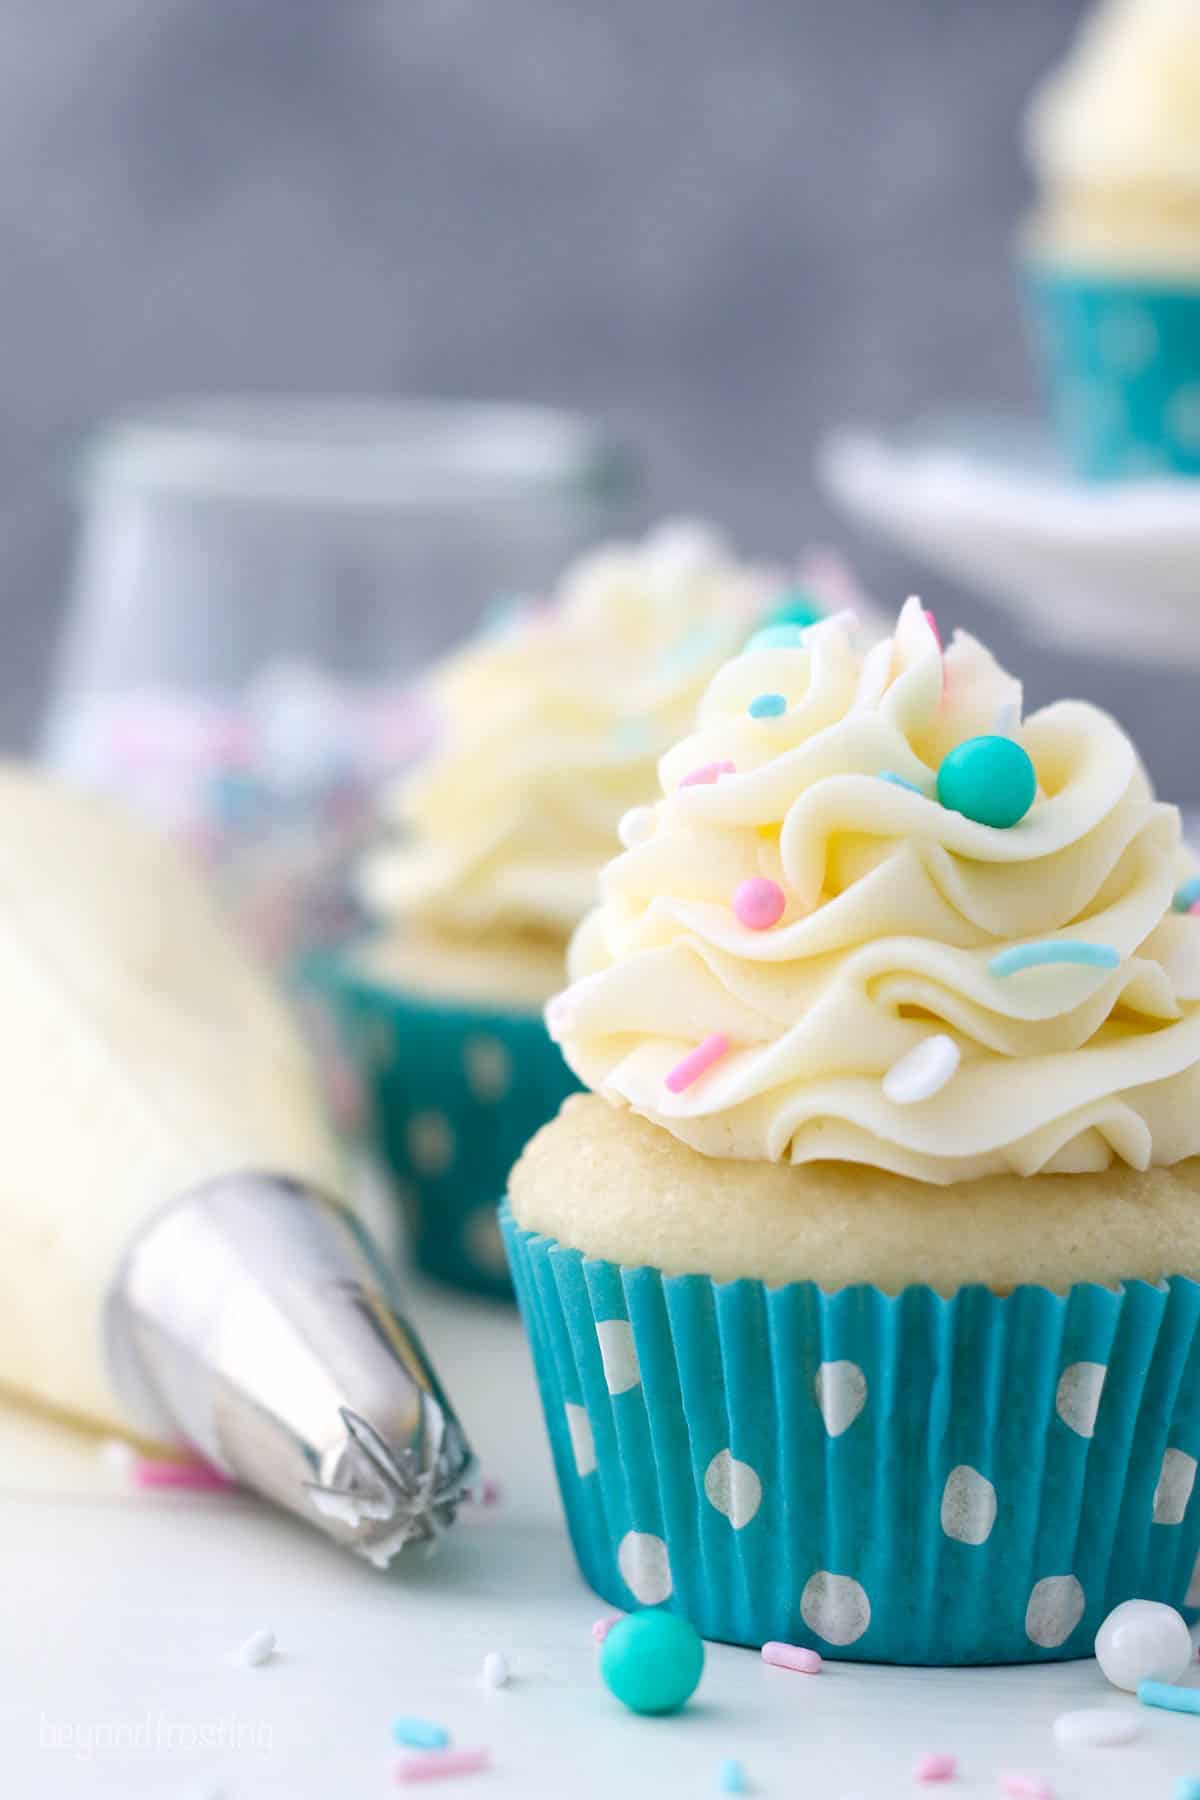 A close up of a frosted vanilla cupcake in a teal polka dot liner